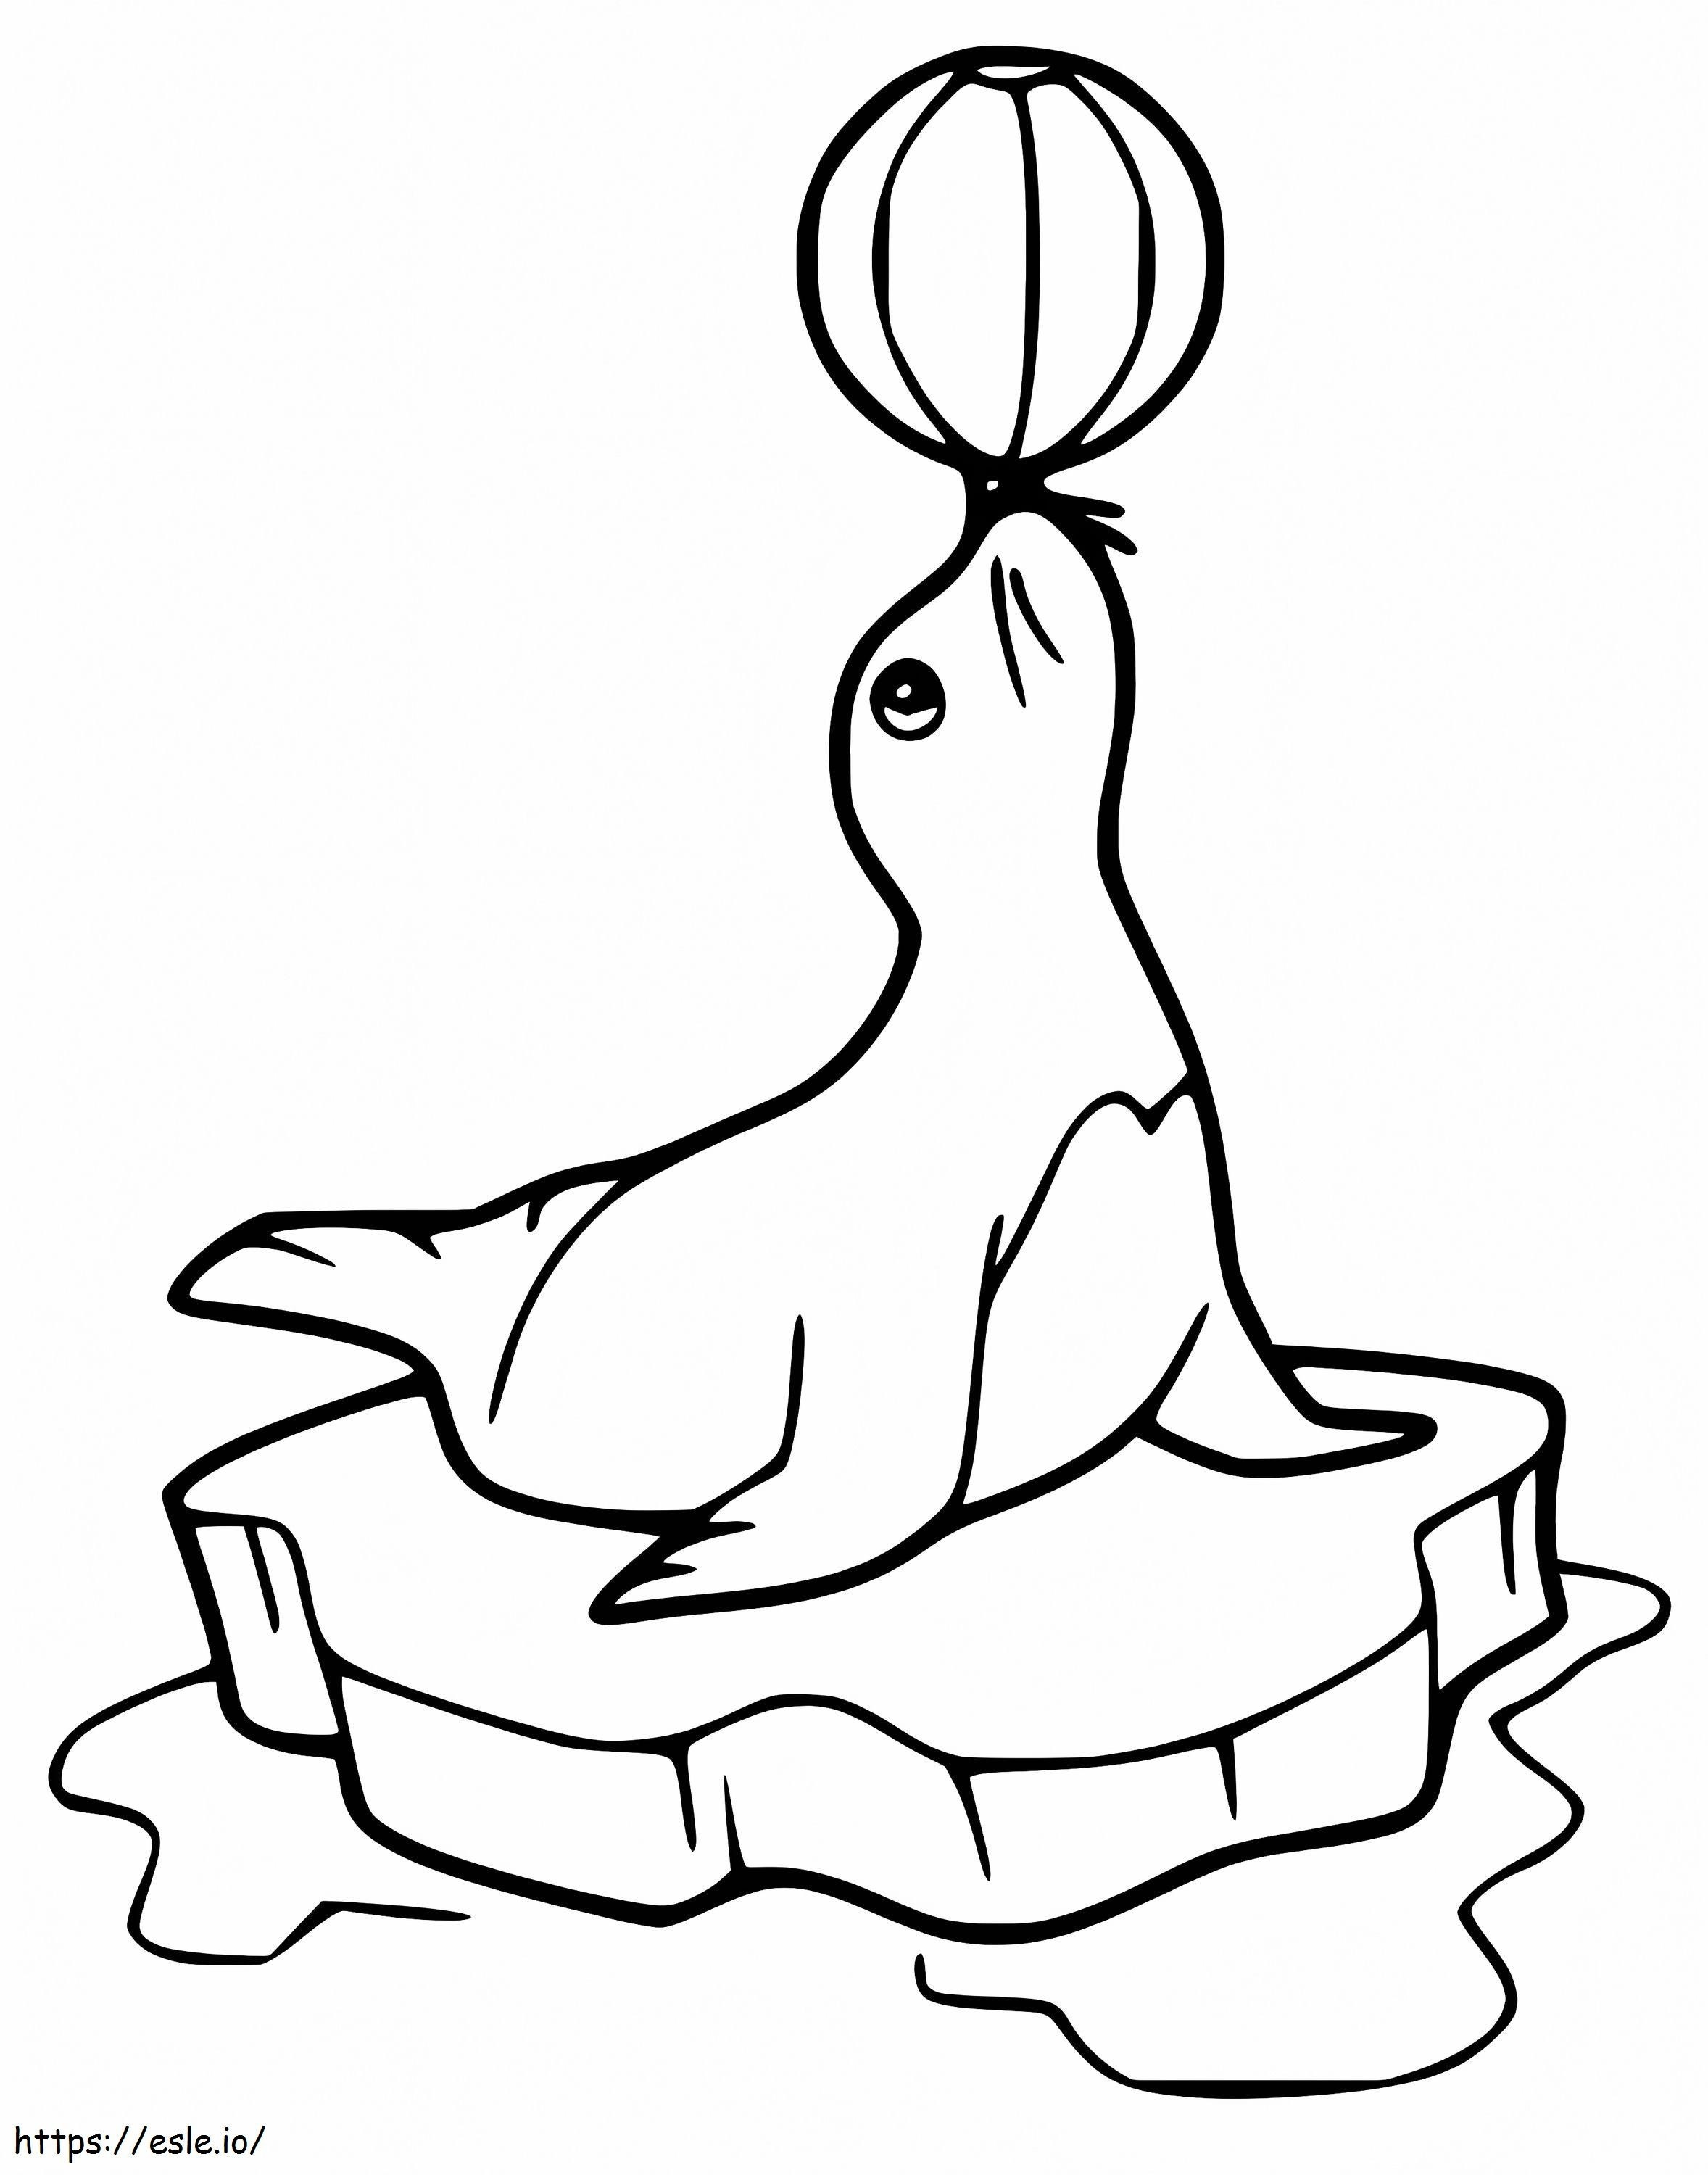 Sea Lion On Ice coloring page